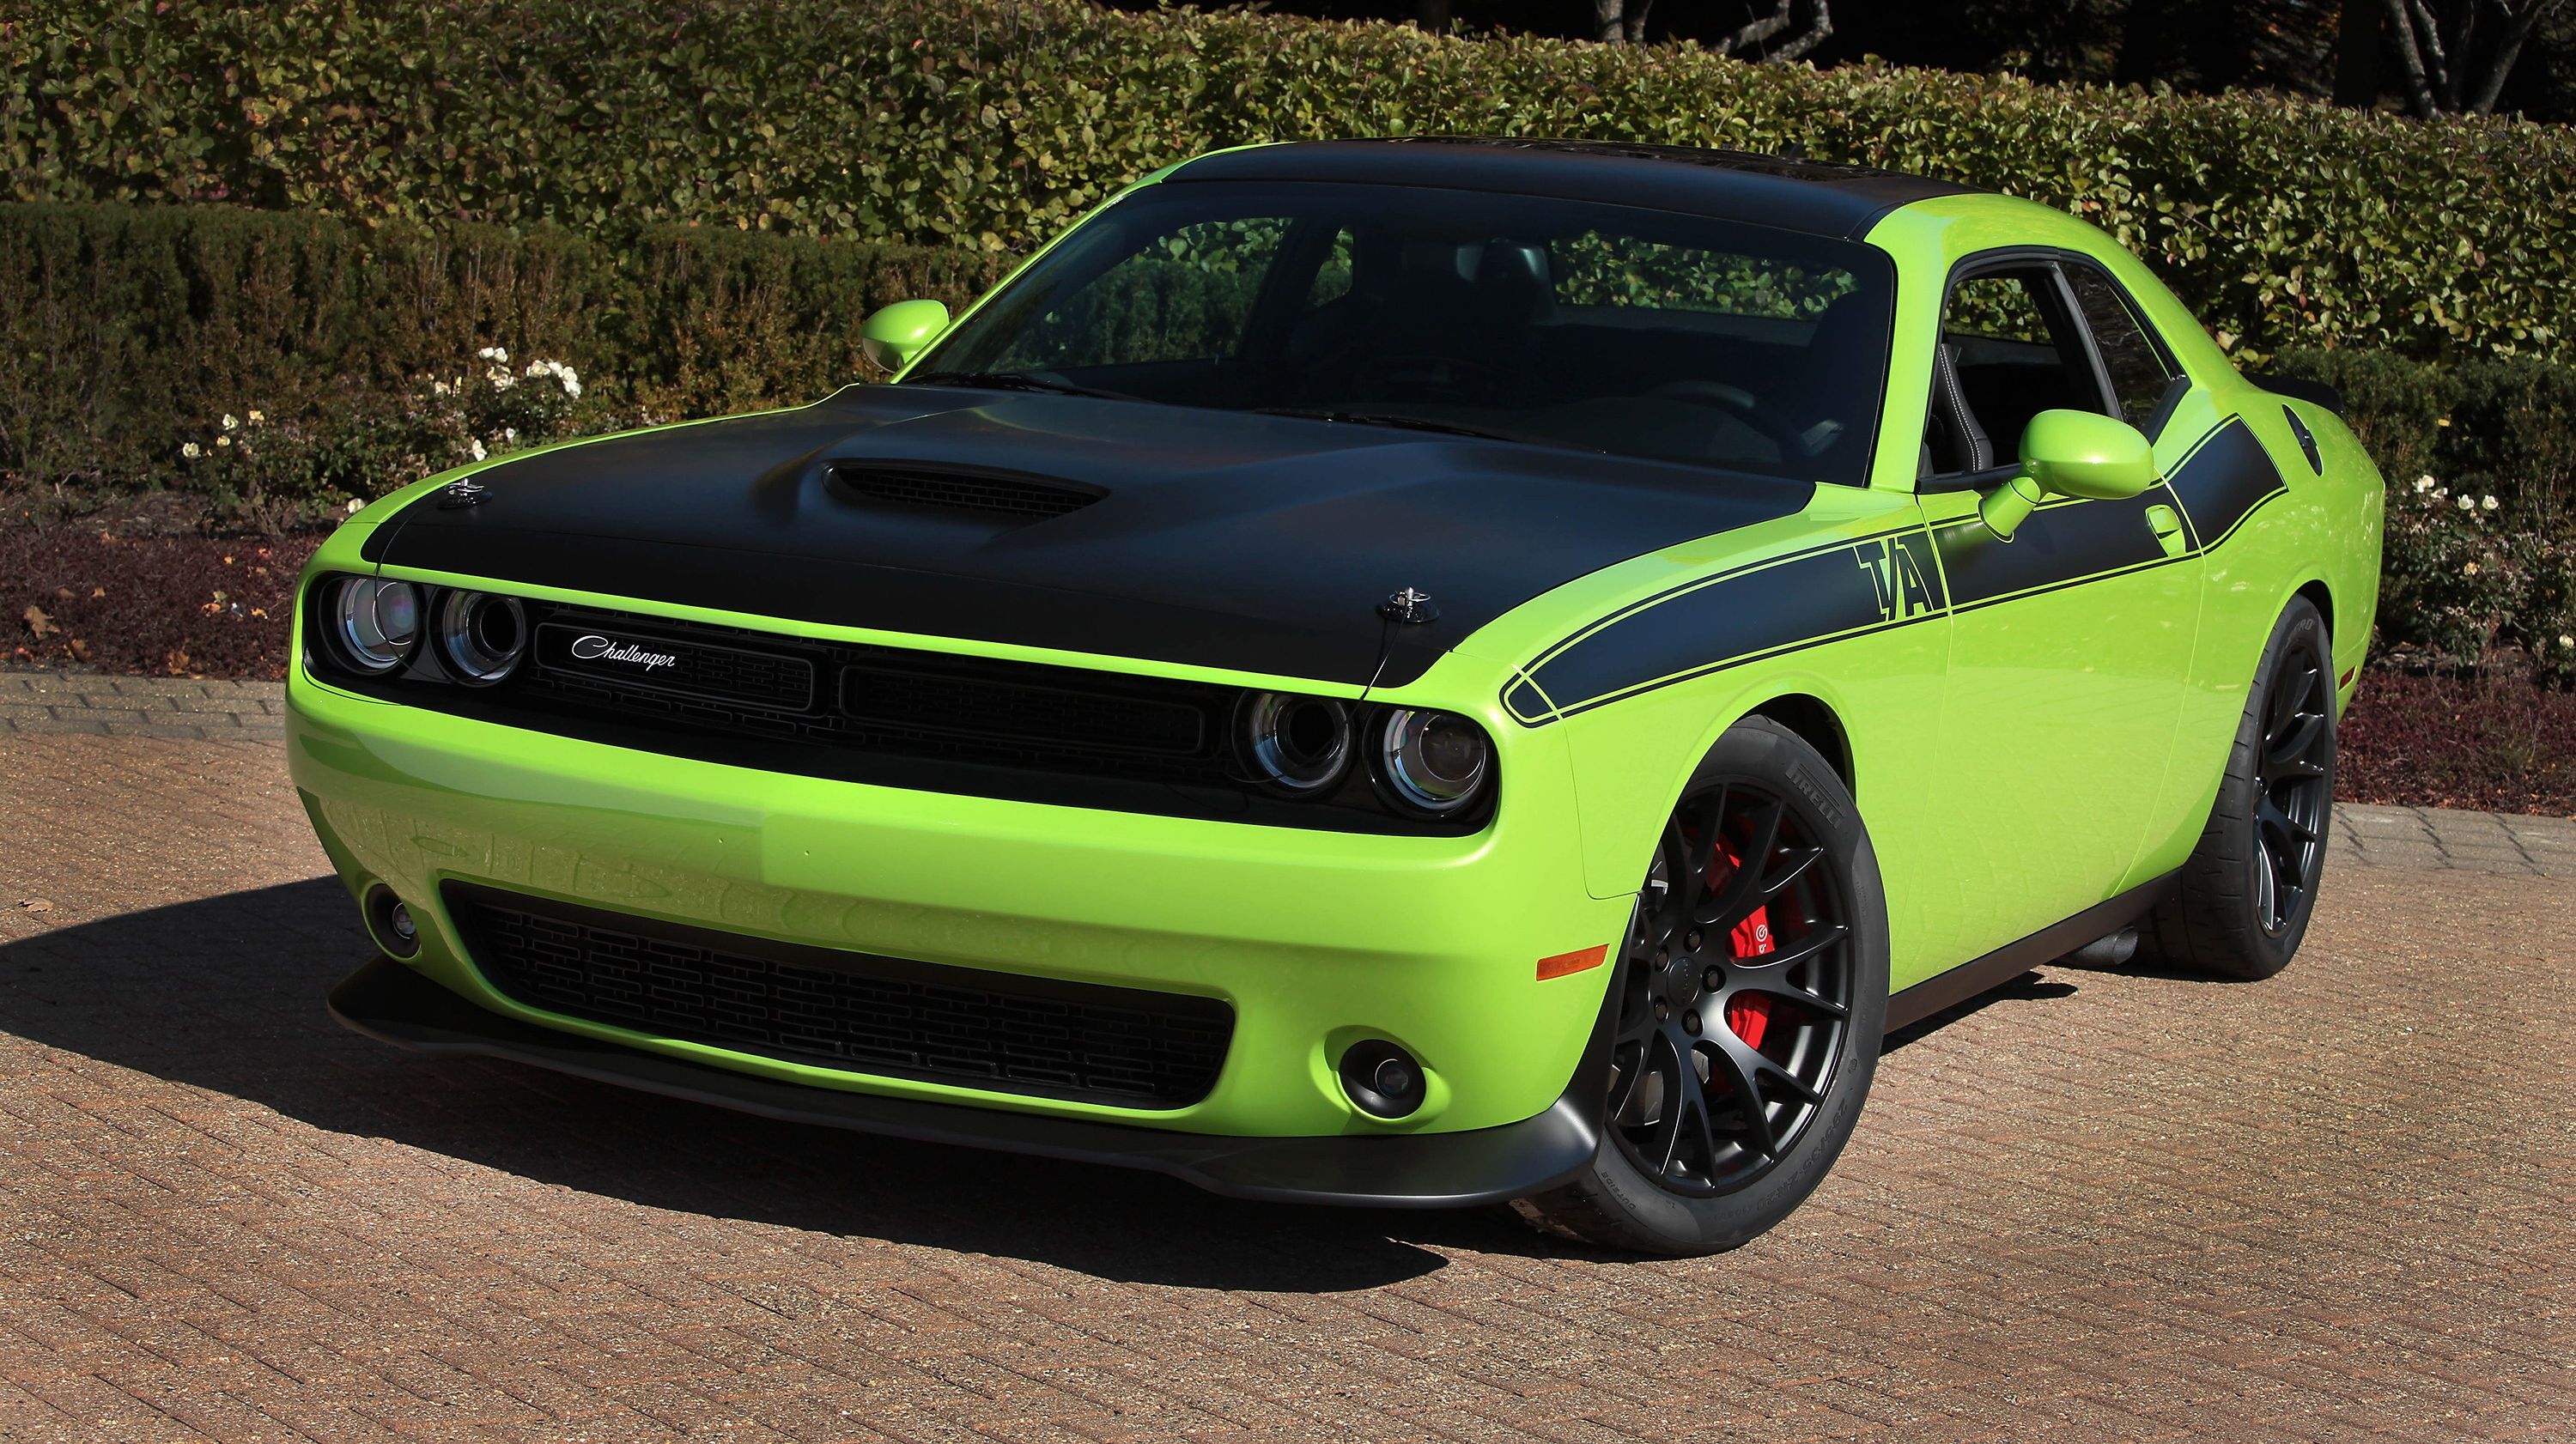  Dodge is reviving the Challenger T/A name for an appearance at the 2014 SEMA auto show. Whill it eventually become a standalone package?